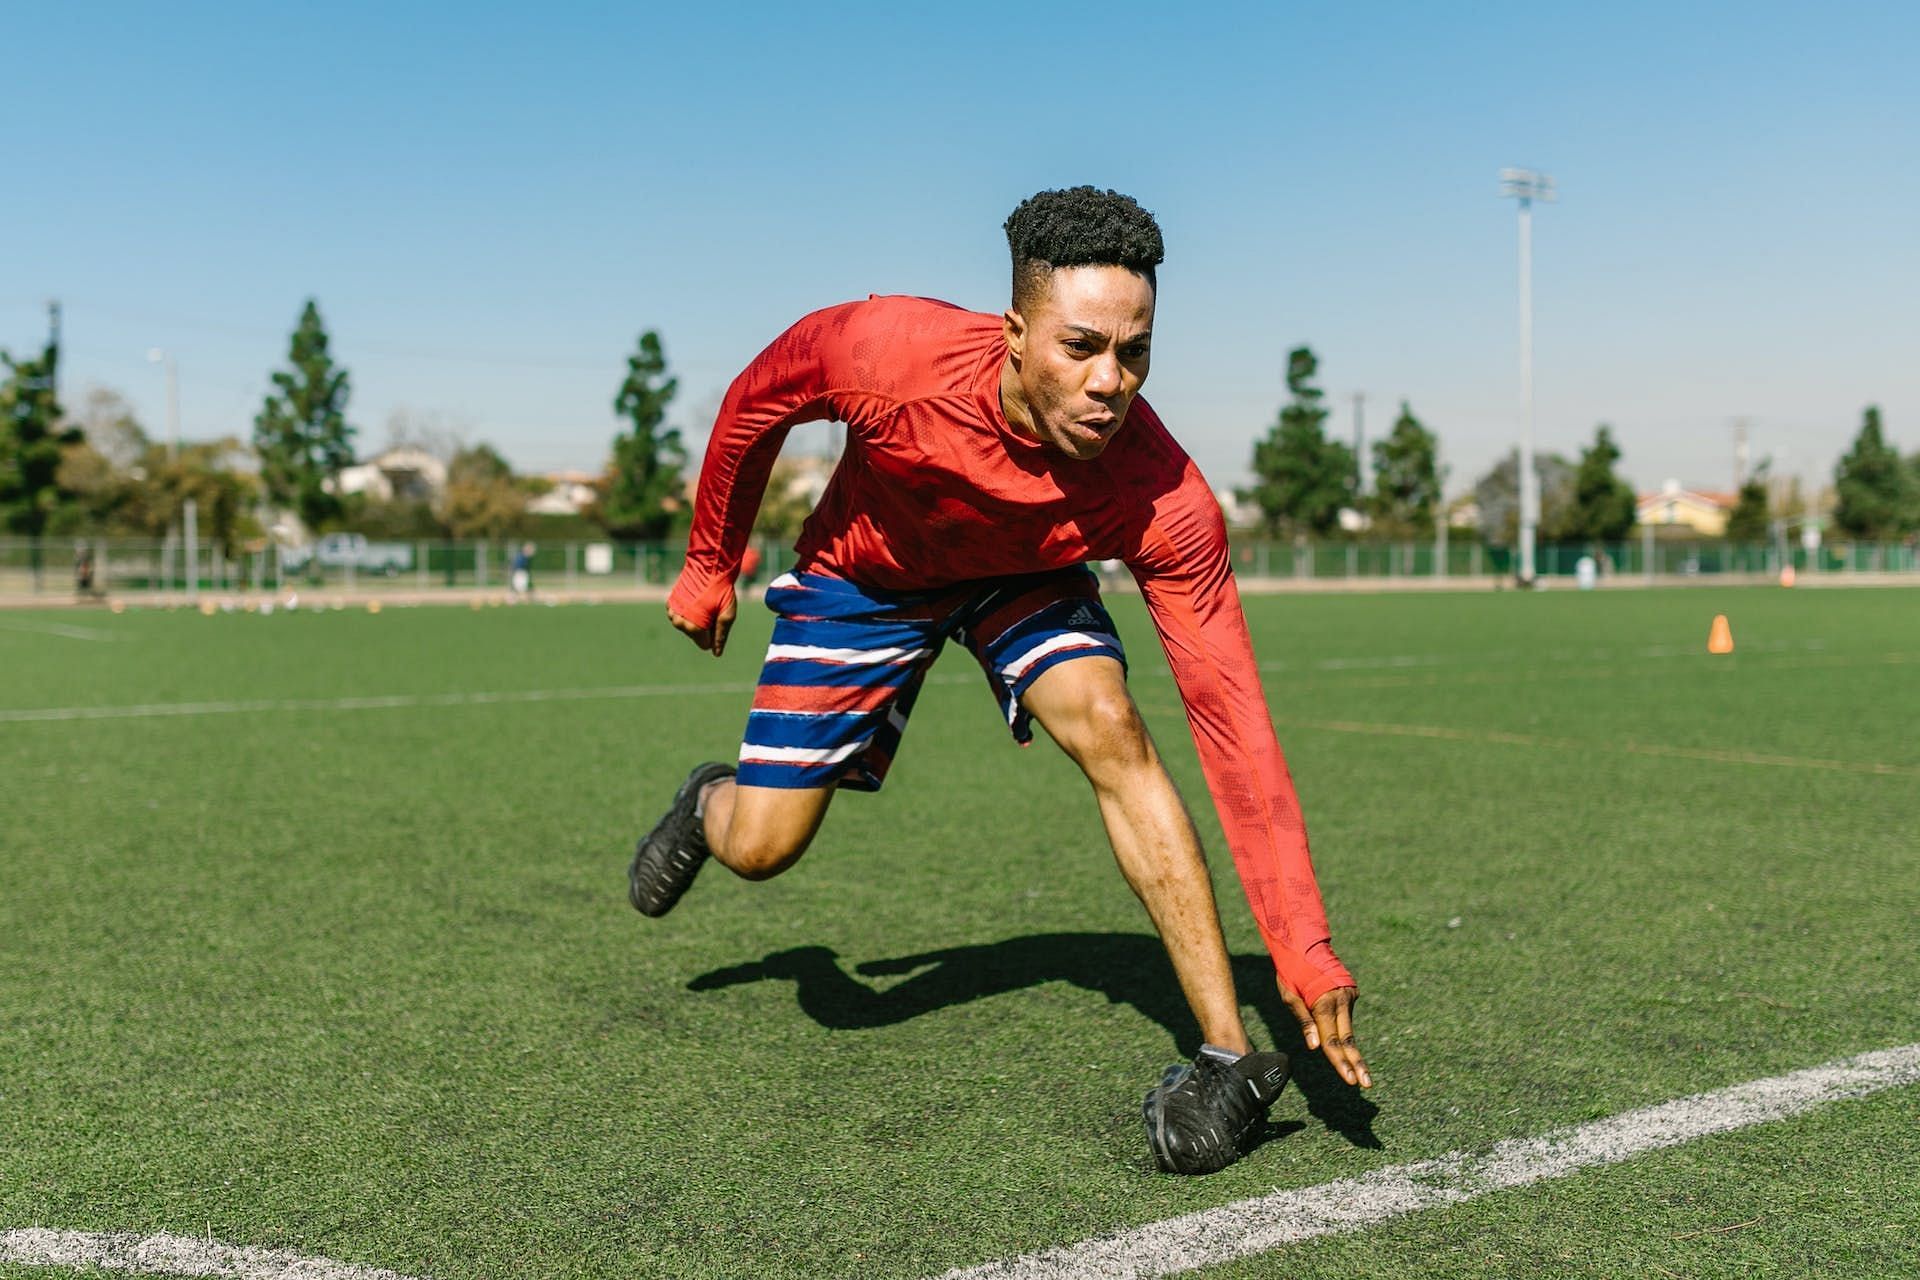 Sprinting burns calories with its intensity (Image via Pexels/RDNE Stock project)